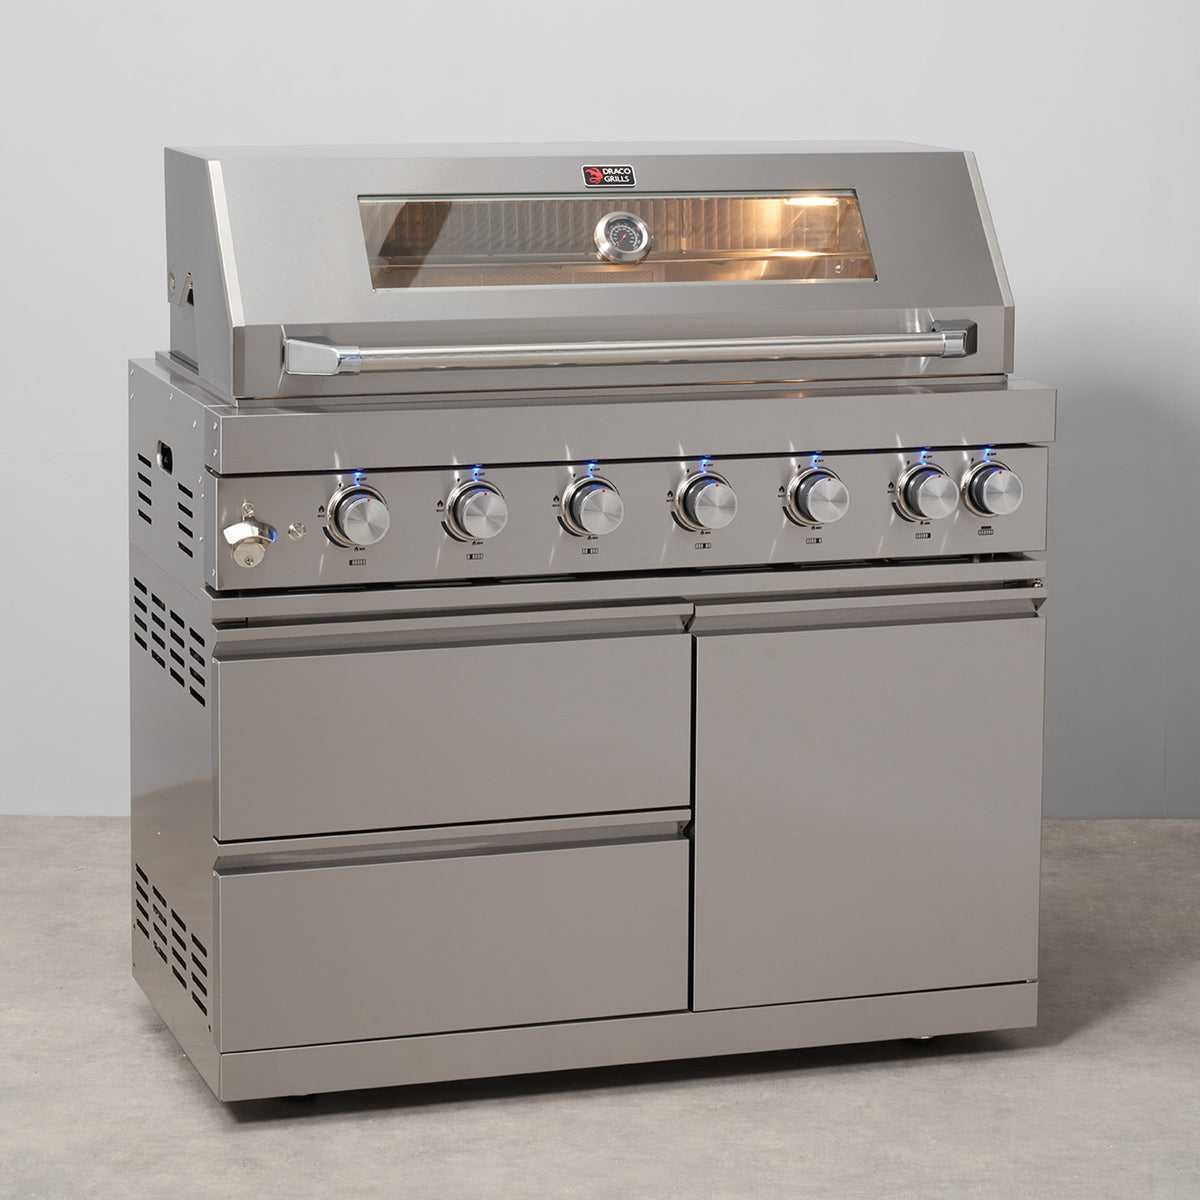 Draco Grills 6 Burner BBQ Modular Outdoor Kitchen with Sear Station and Double Door Cabinet